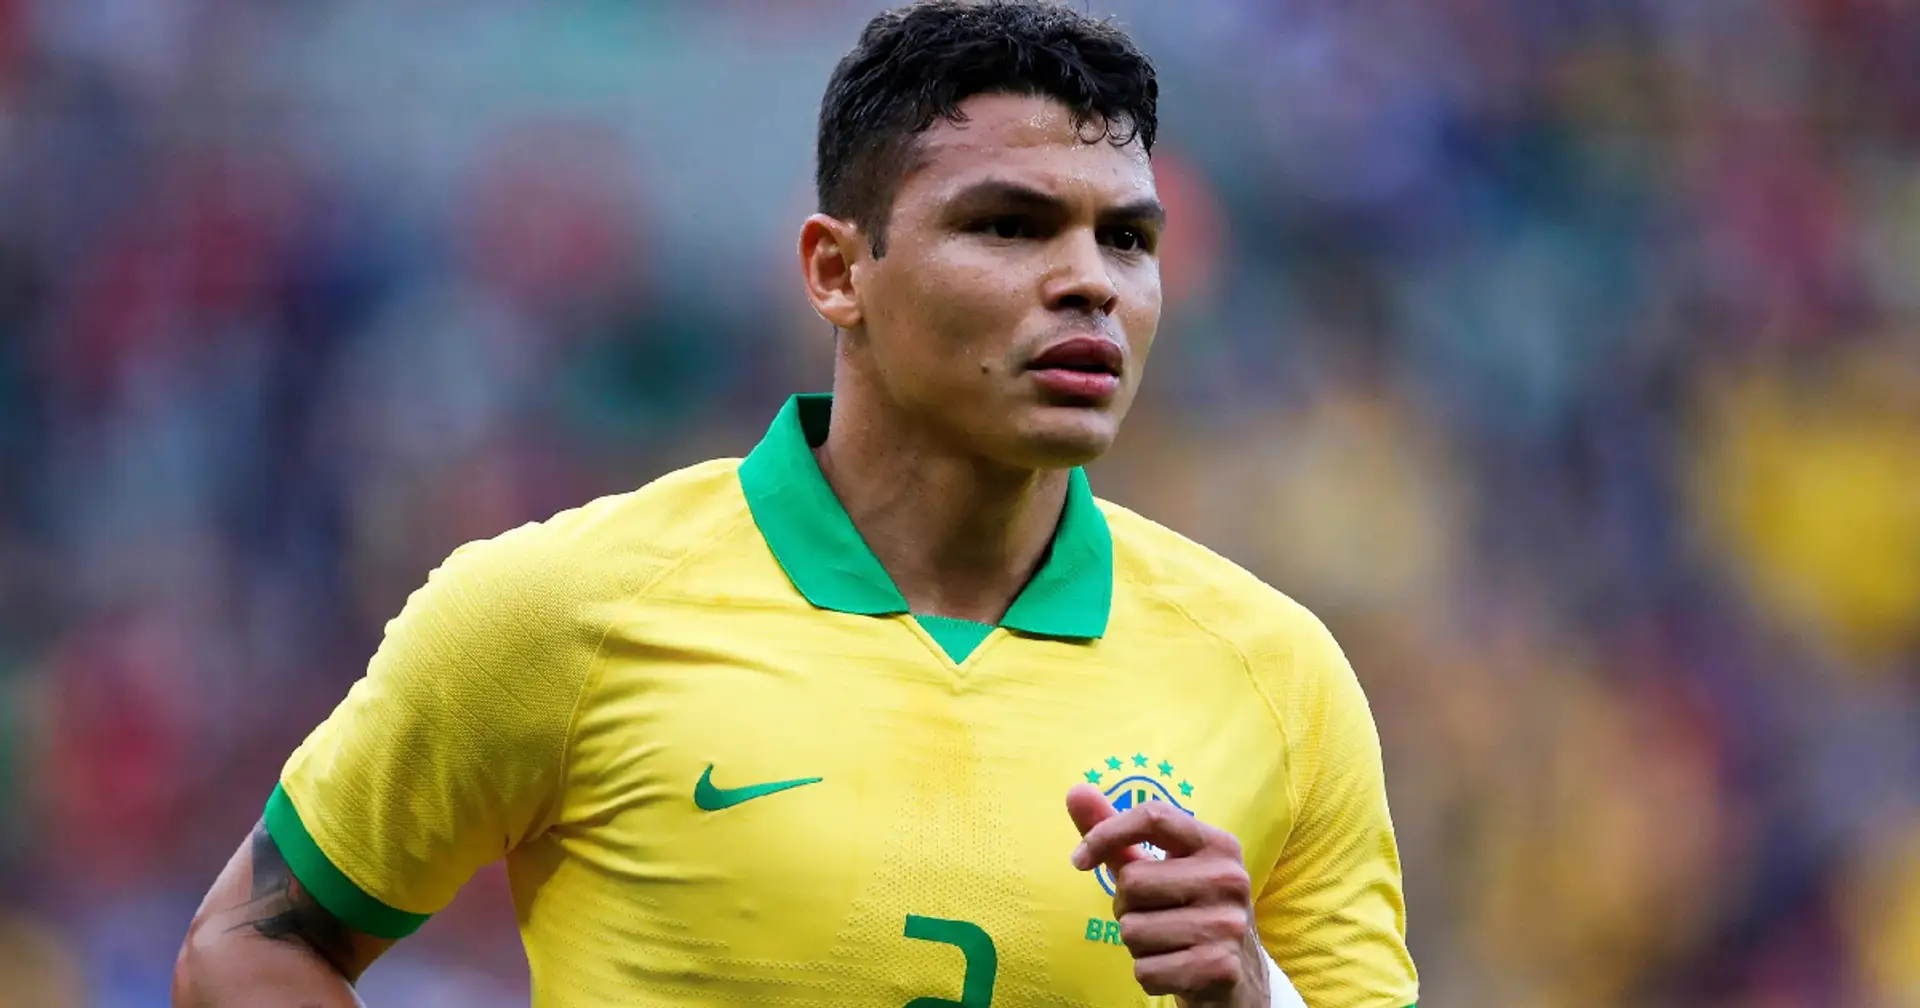 Only 8th player in history: Thiago Silva achieves incredible landmark for Brazil